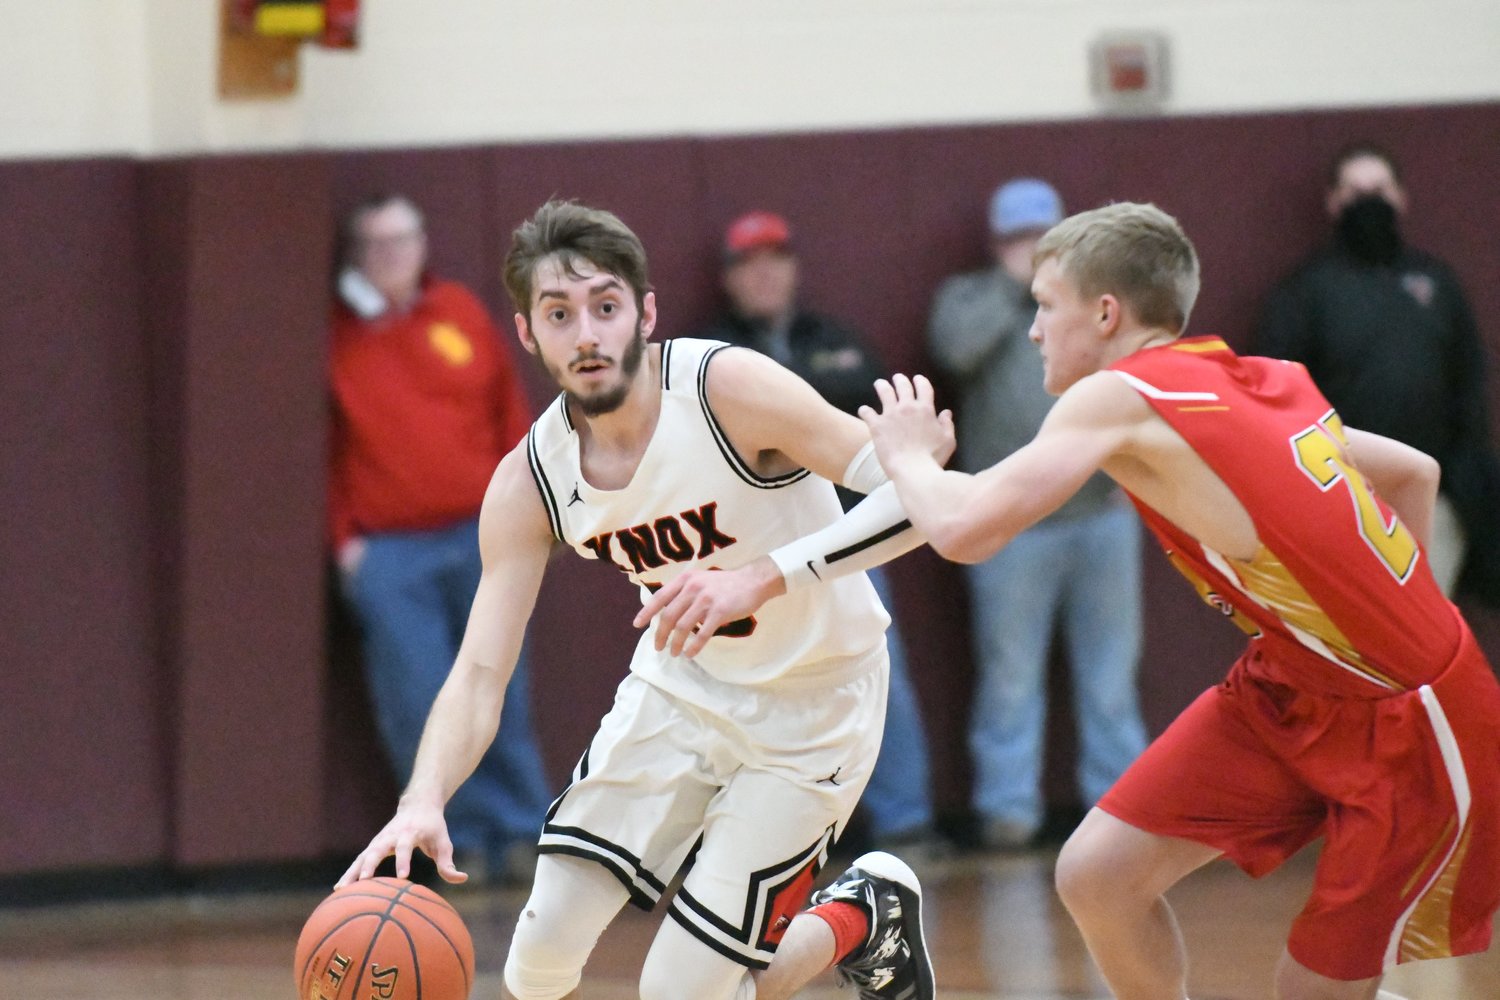 Knox County senior guard Coltin Morrow dribbles past a North Shelby defender during Monday's 62-52 win at the Tri-Rivers Classic.